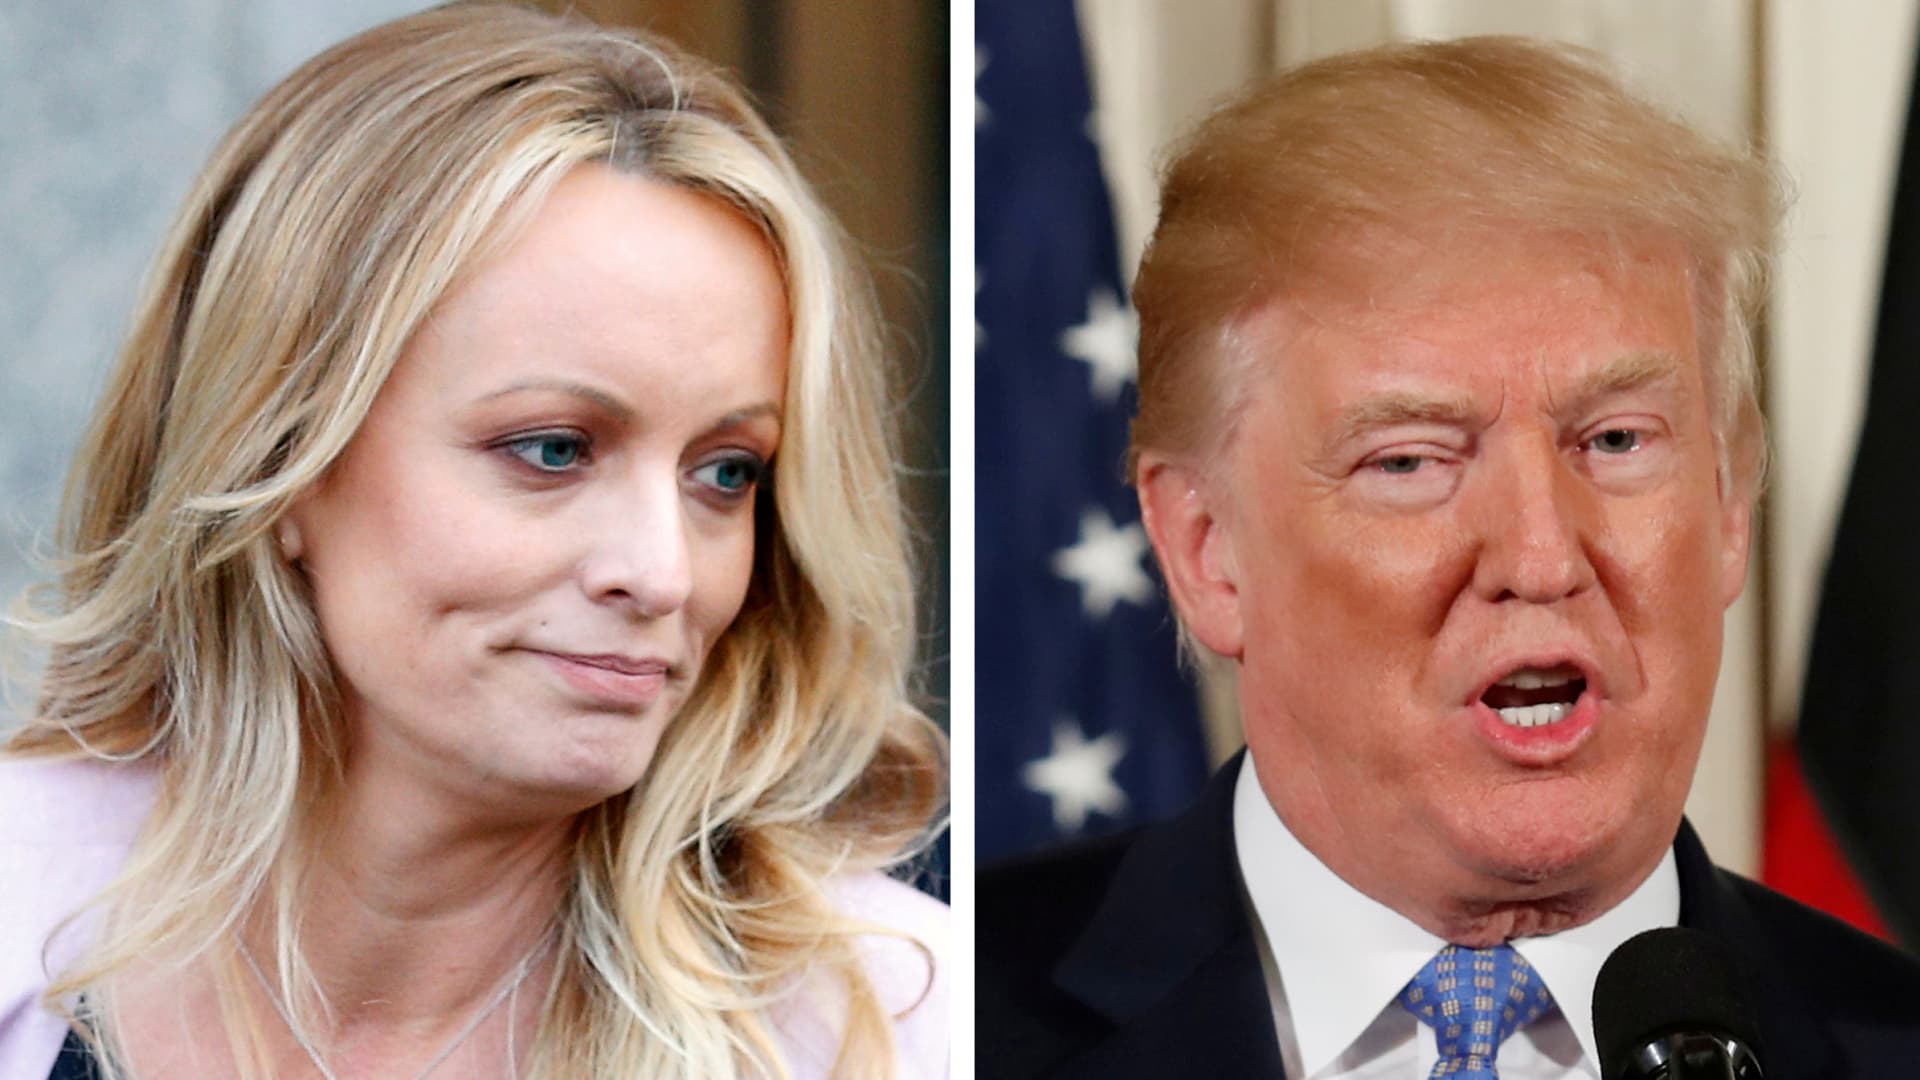 Porn star Stormy Daniels loses appeal in Trump case, owes former president almost 0,000